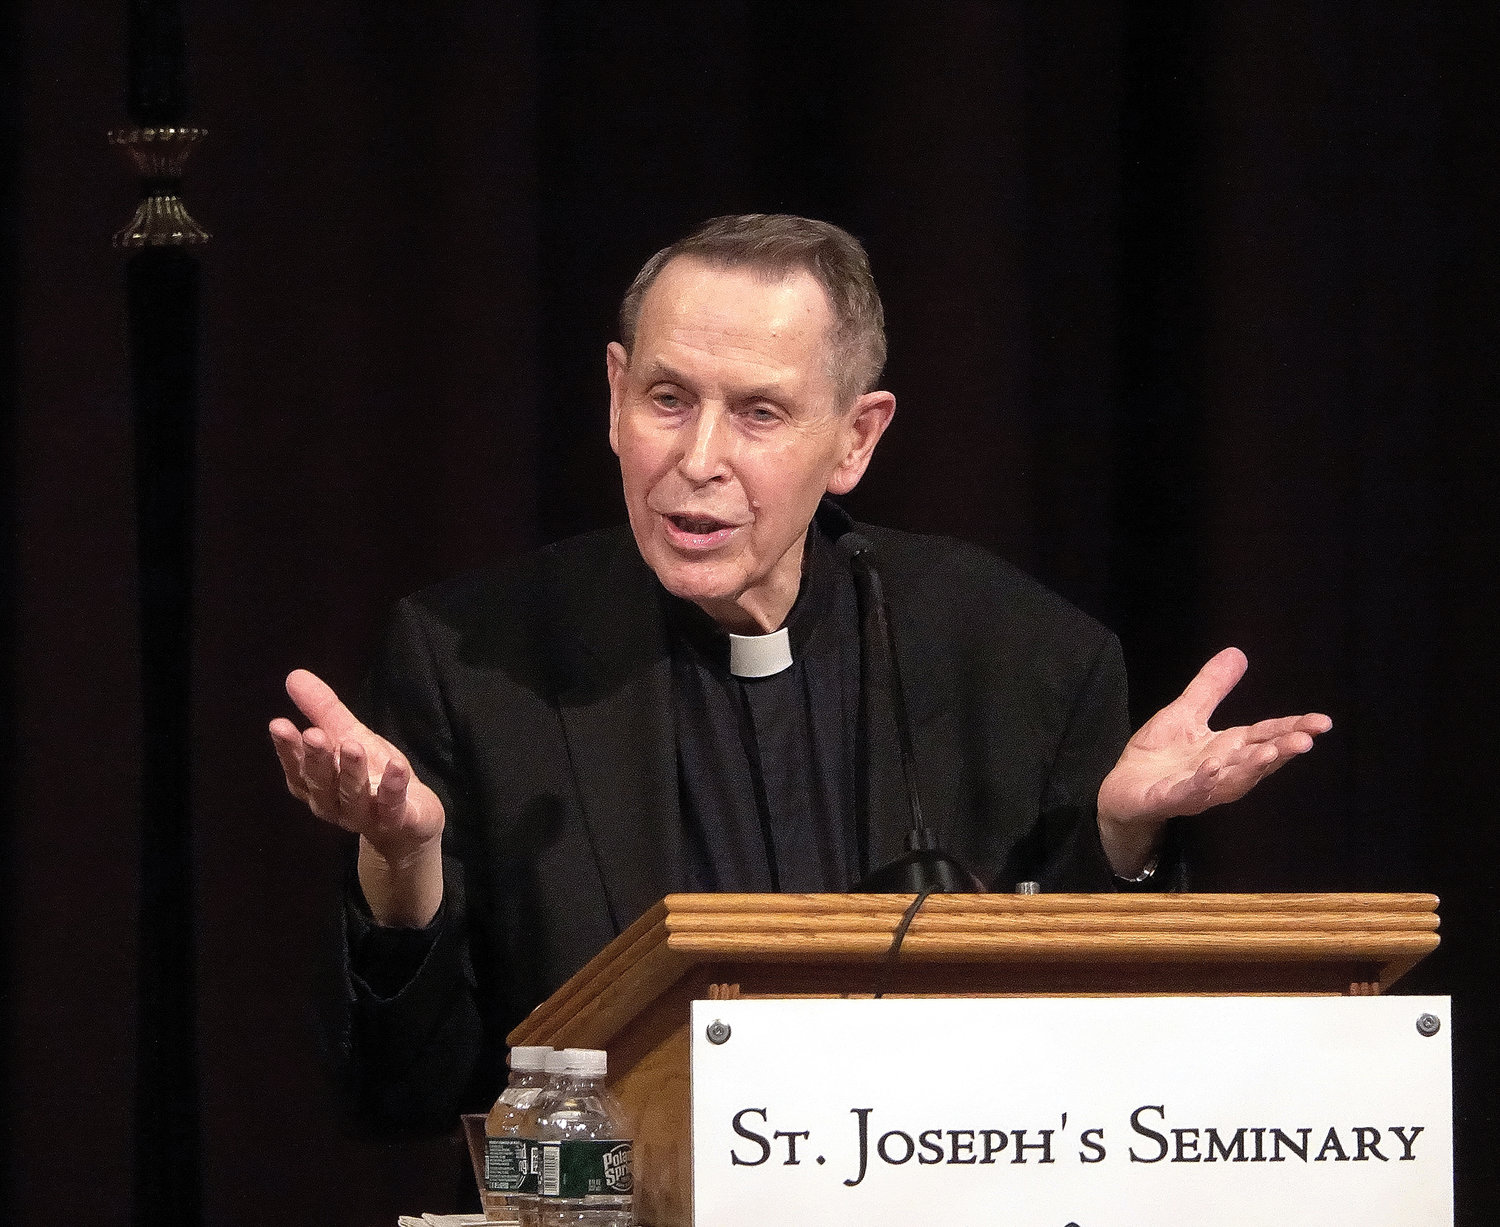 Msgr. John P. Meier, an alumnus and former chairman of the Scripture department at St. Joseph’s Seminary, Dunwoodie, returns to deliver a lecture on “The Historical Jesus: An Overview” Feb. 3 in celebration of the seminary’s 125th anniversary.